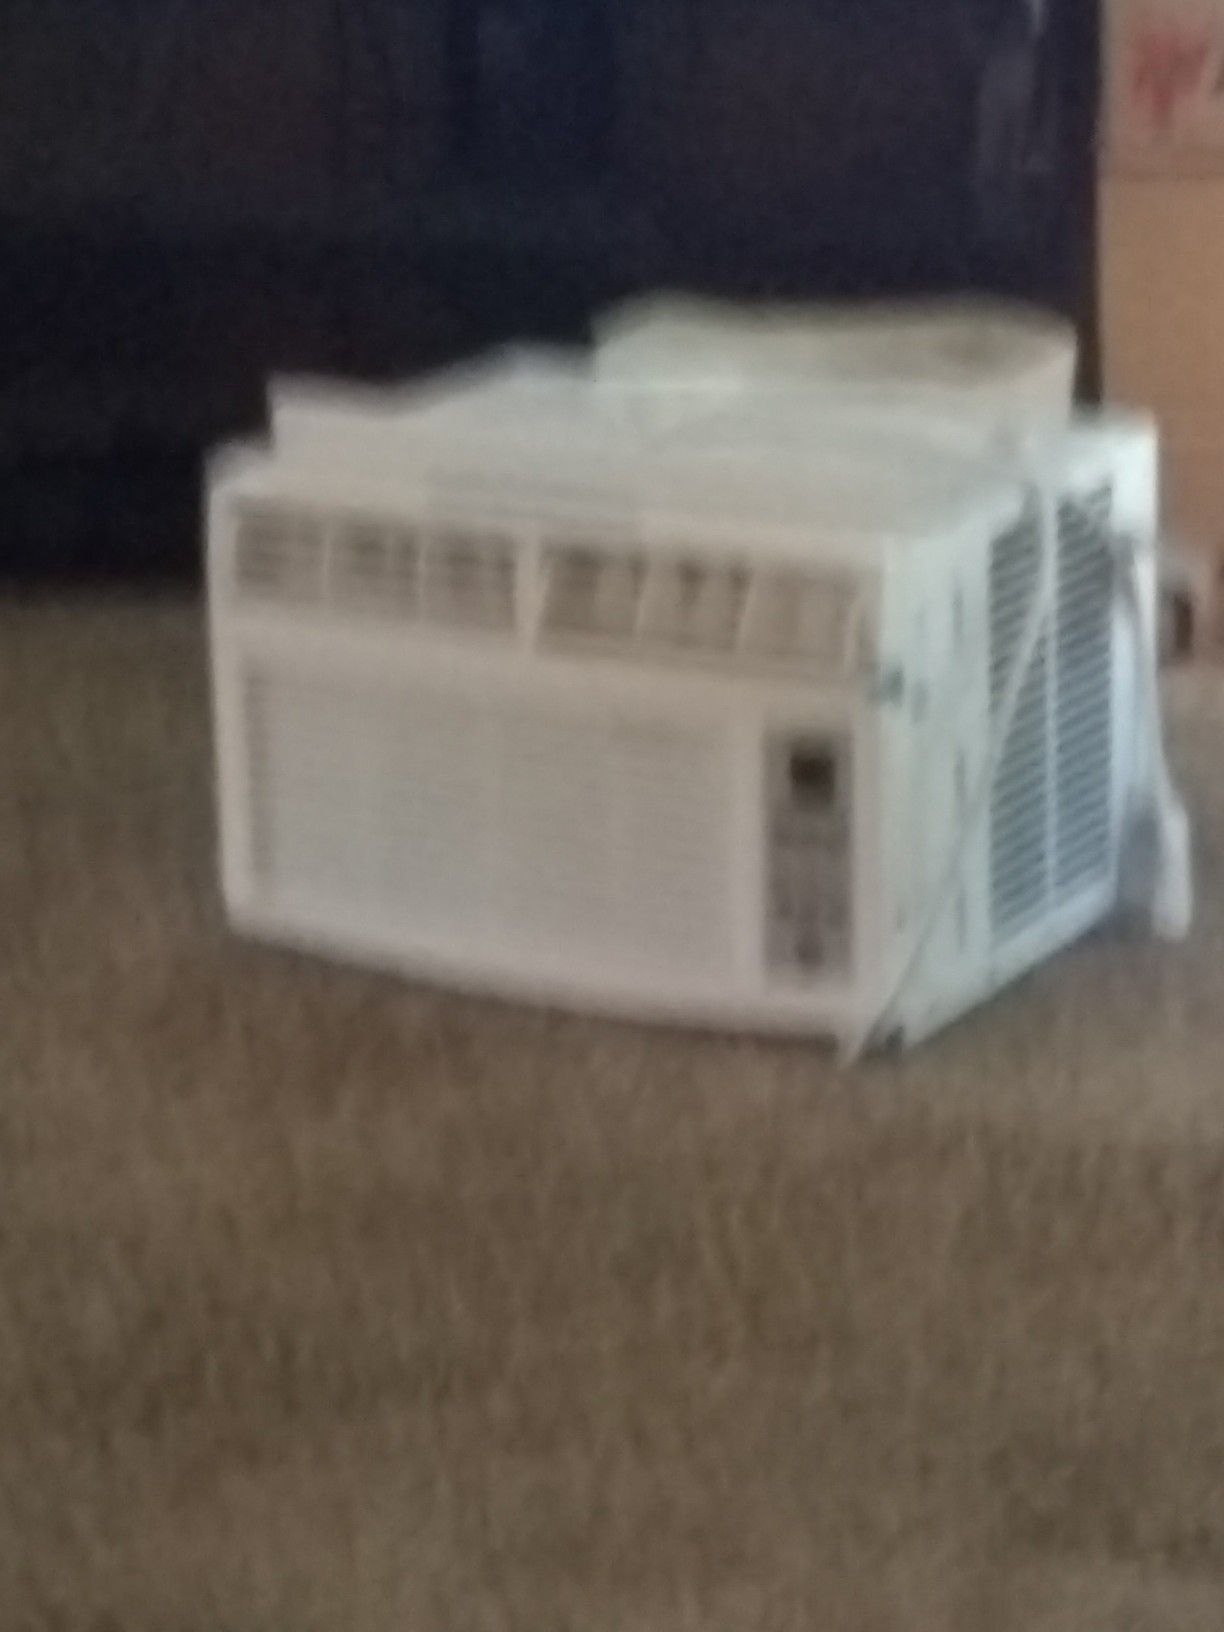 Small air conditioner,works great,bought in September, almost new